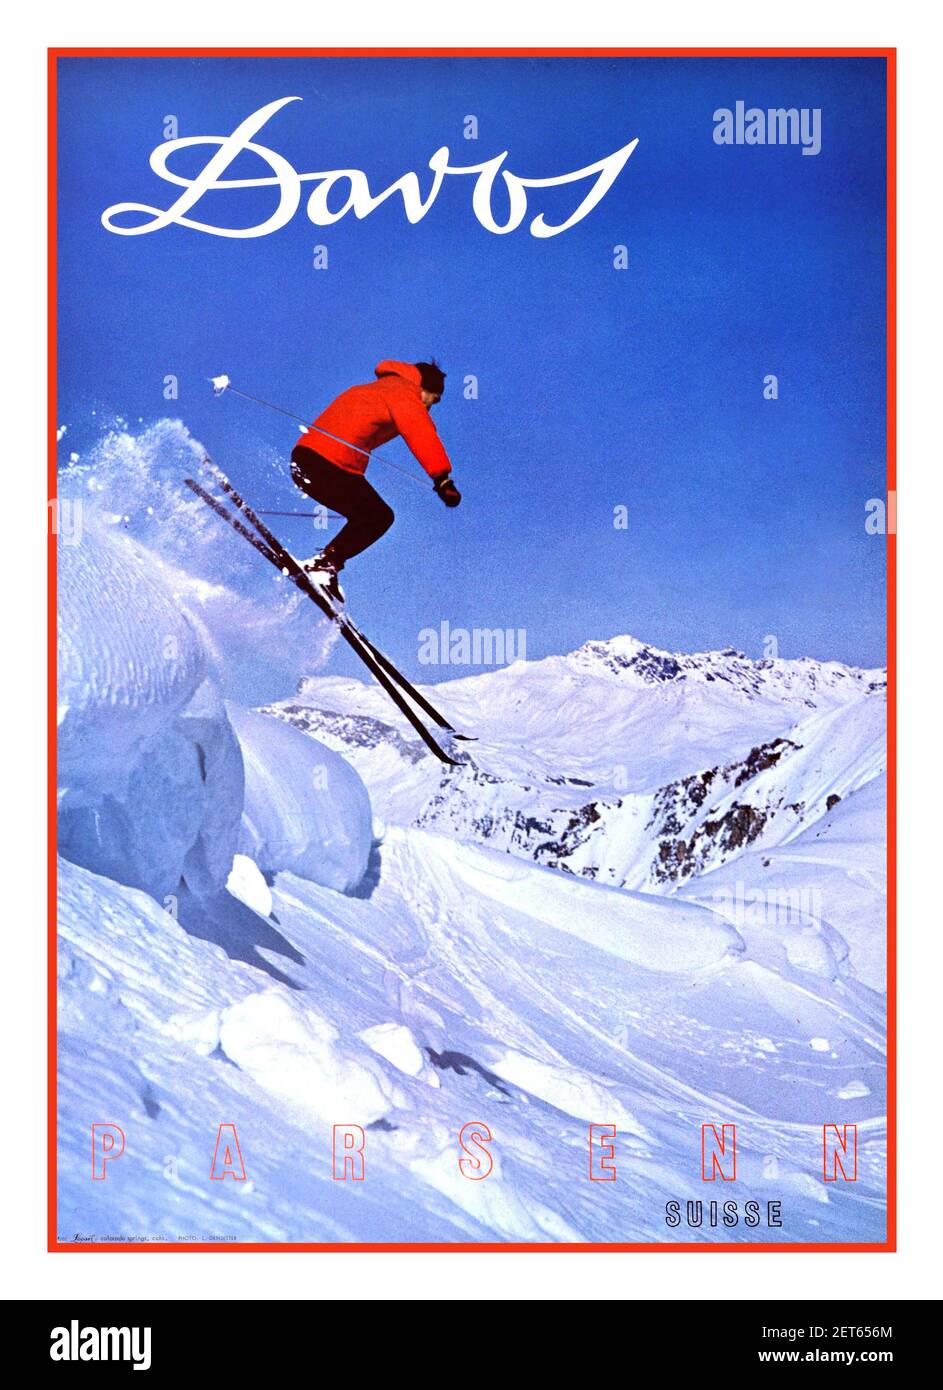 DAVOS SKI SKIING Vintage 1960's ski poster for Davos in Parsenn, Switzerland featuring  illustration of a skier jumping off a slope into crisp white snow. Davos is a ski resort town in the Swiss Alps, within the canton of Graubunden.  USA, designer: L. Gensetter, 1960s Stock Photo